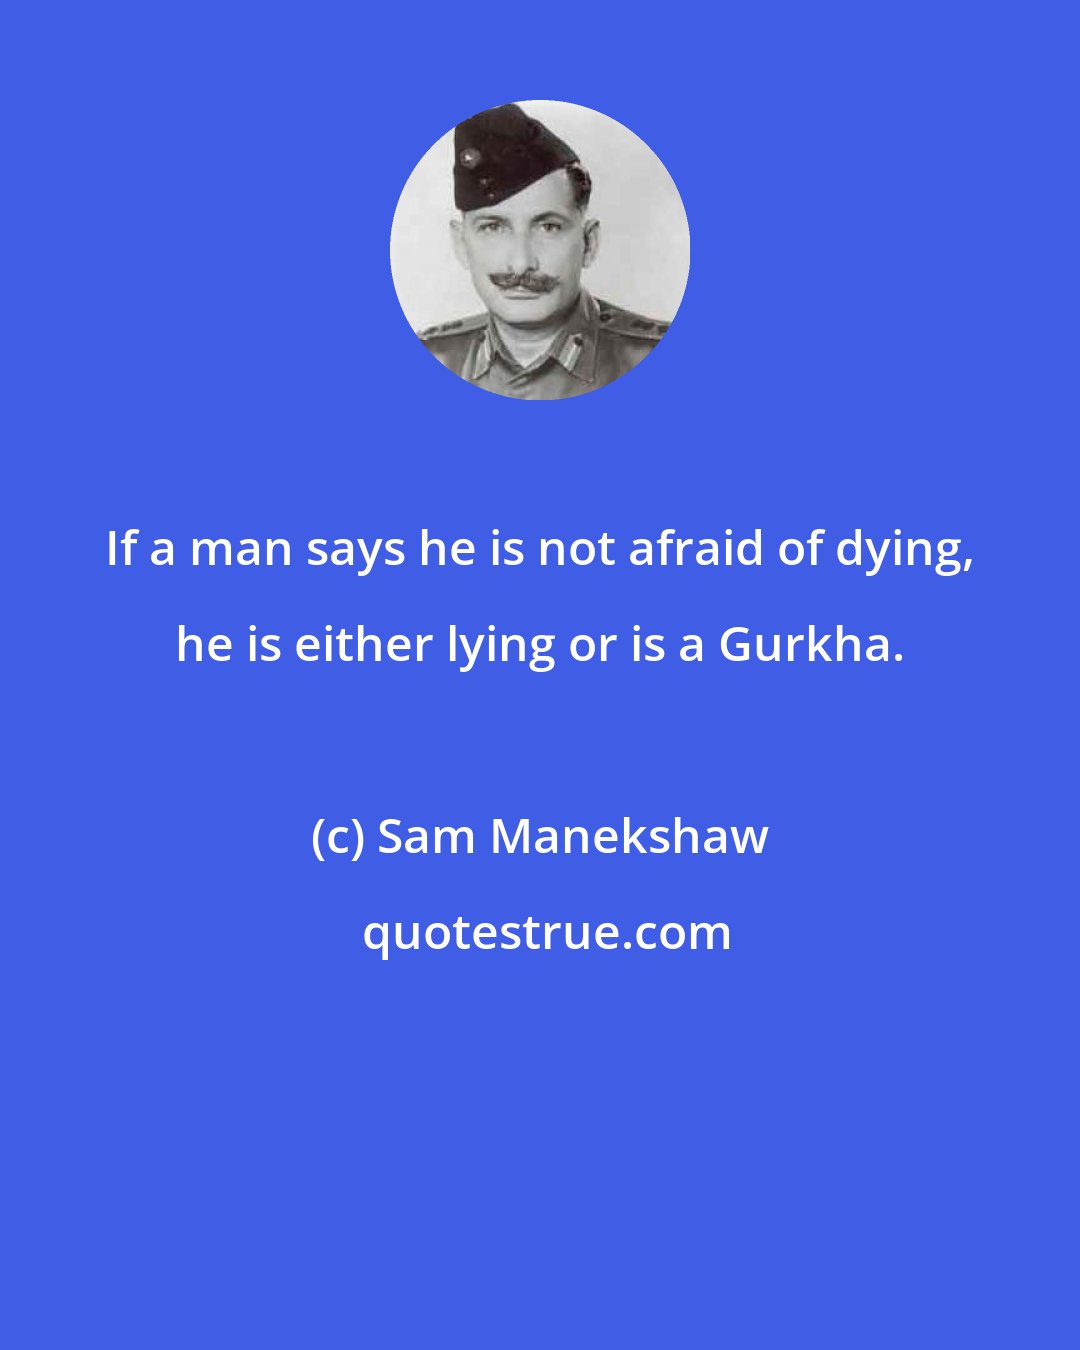 Sam Manekshaw: If a man says he is not afraid of dying, he is either lying or is a Gurkha.